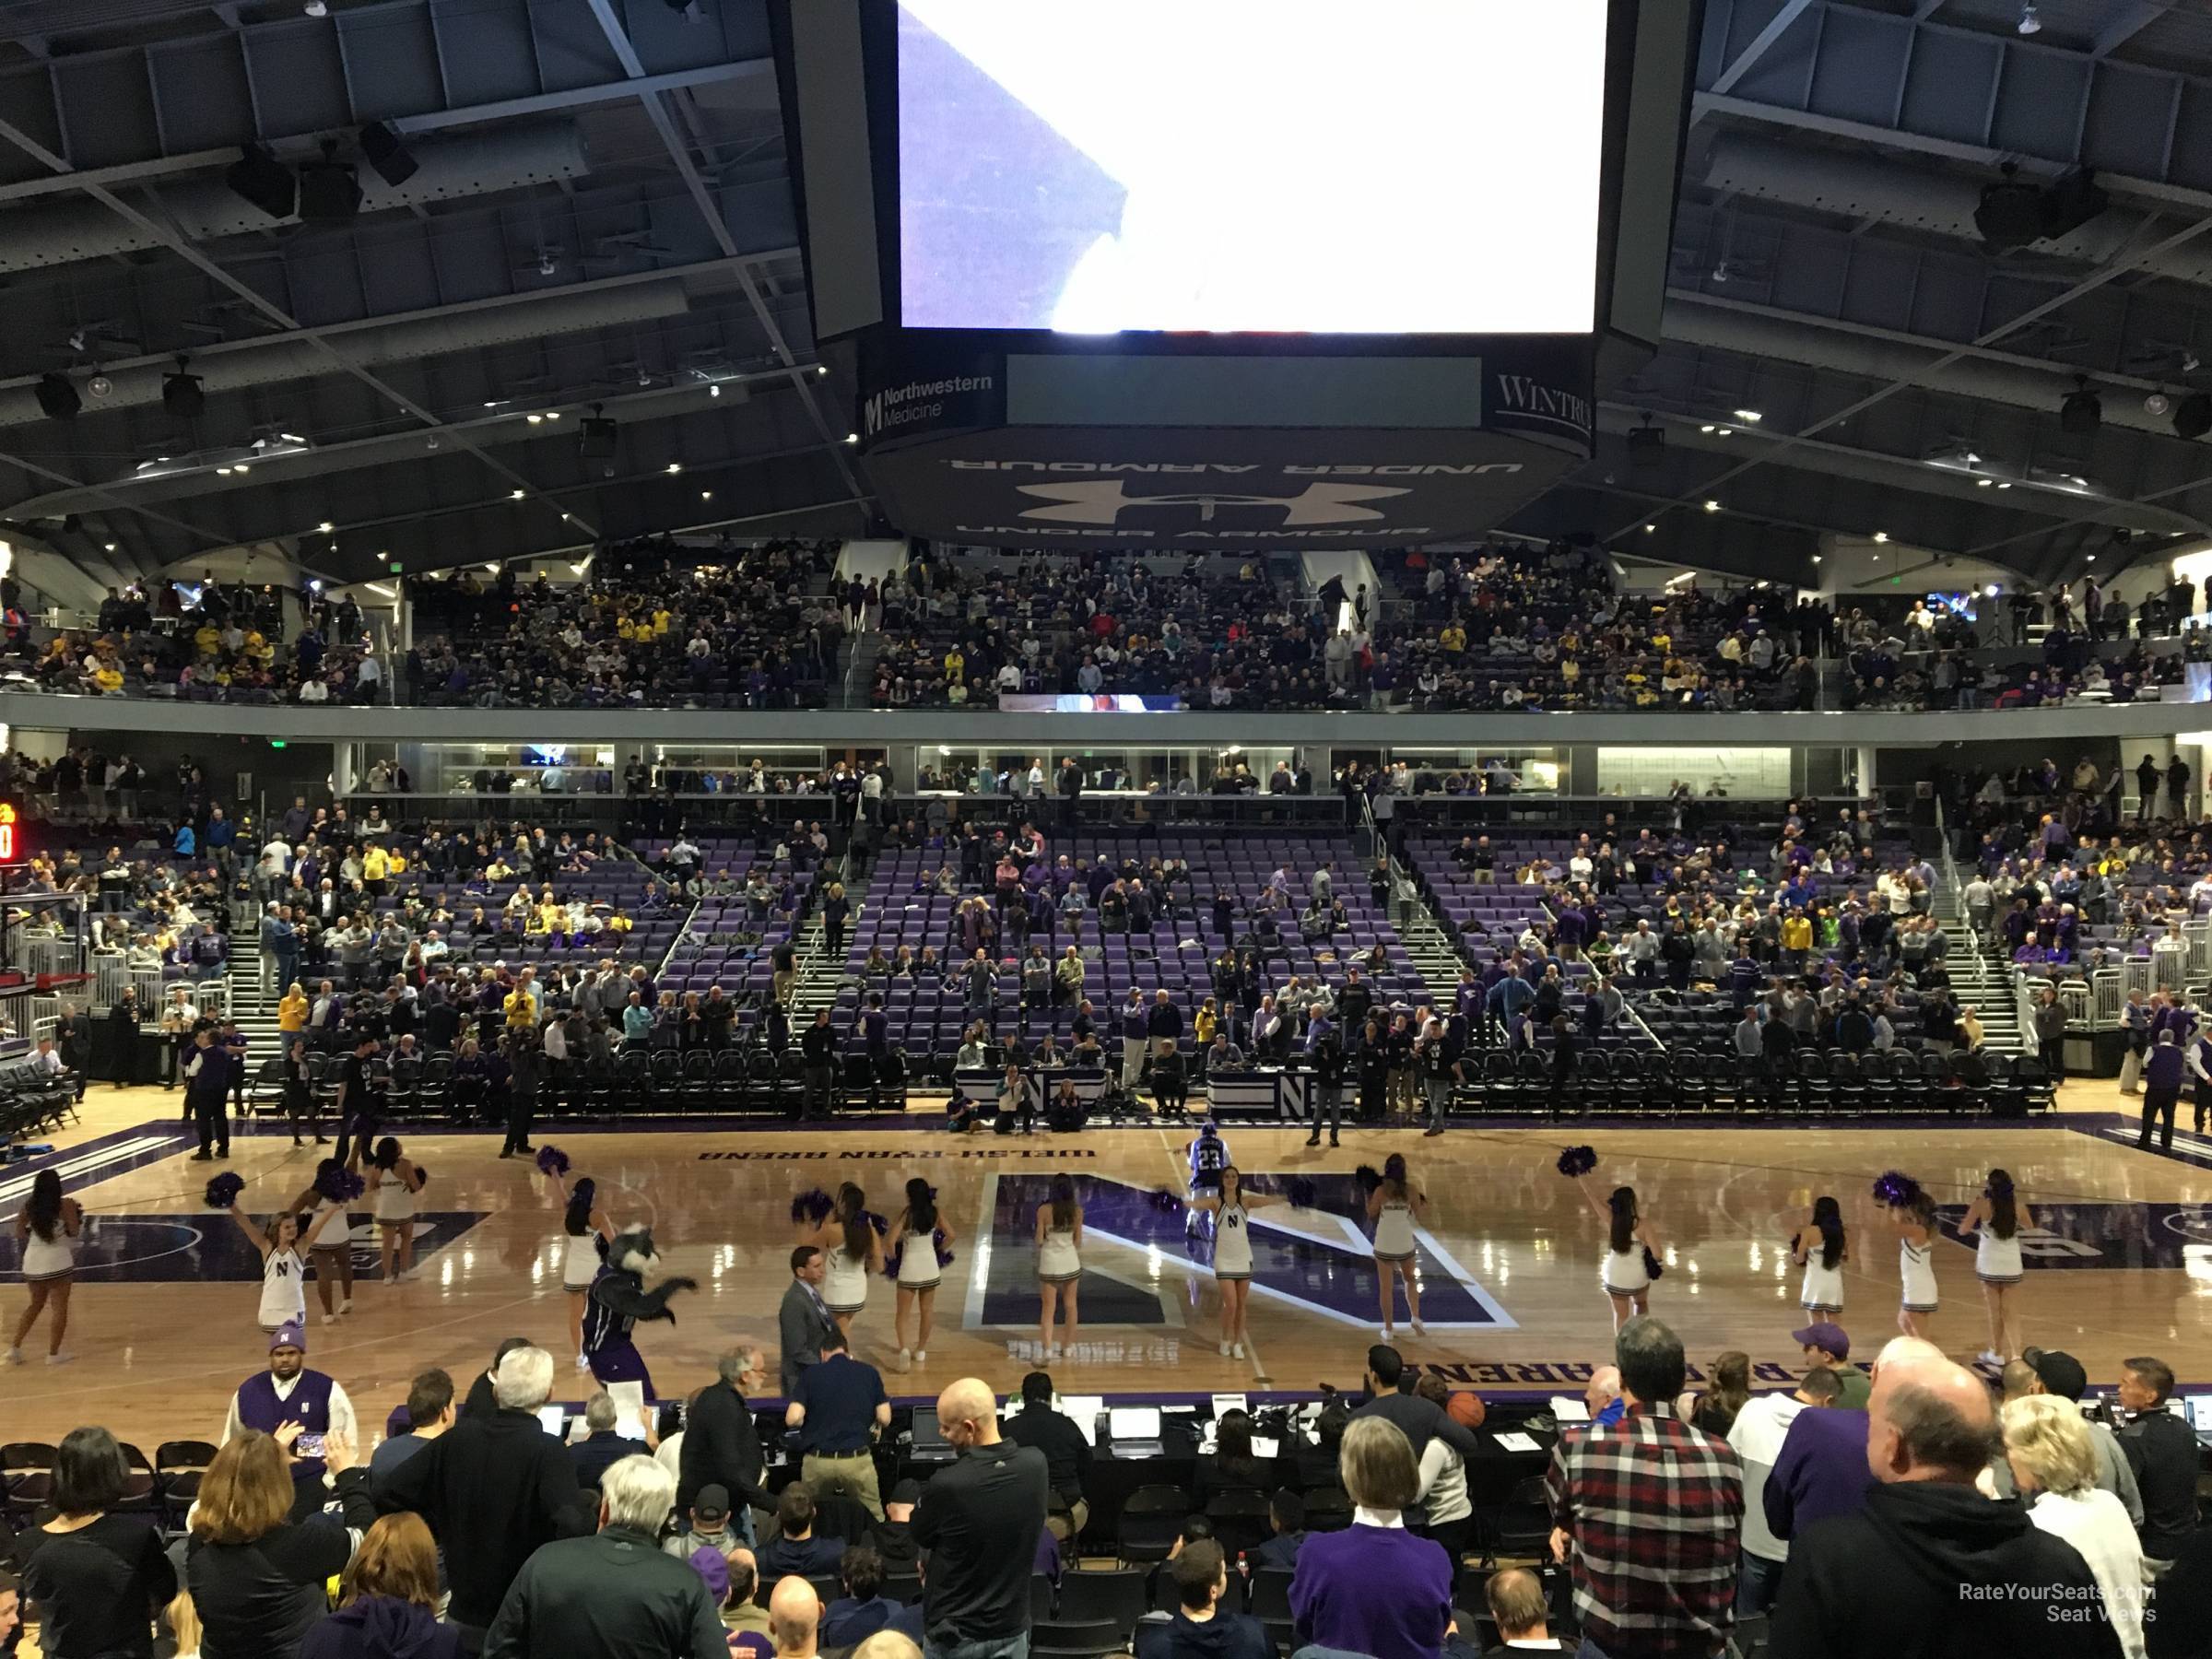 section 108, row 12 seat view  - welsh-ryan arena